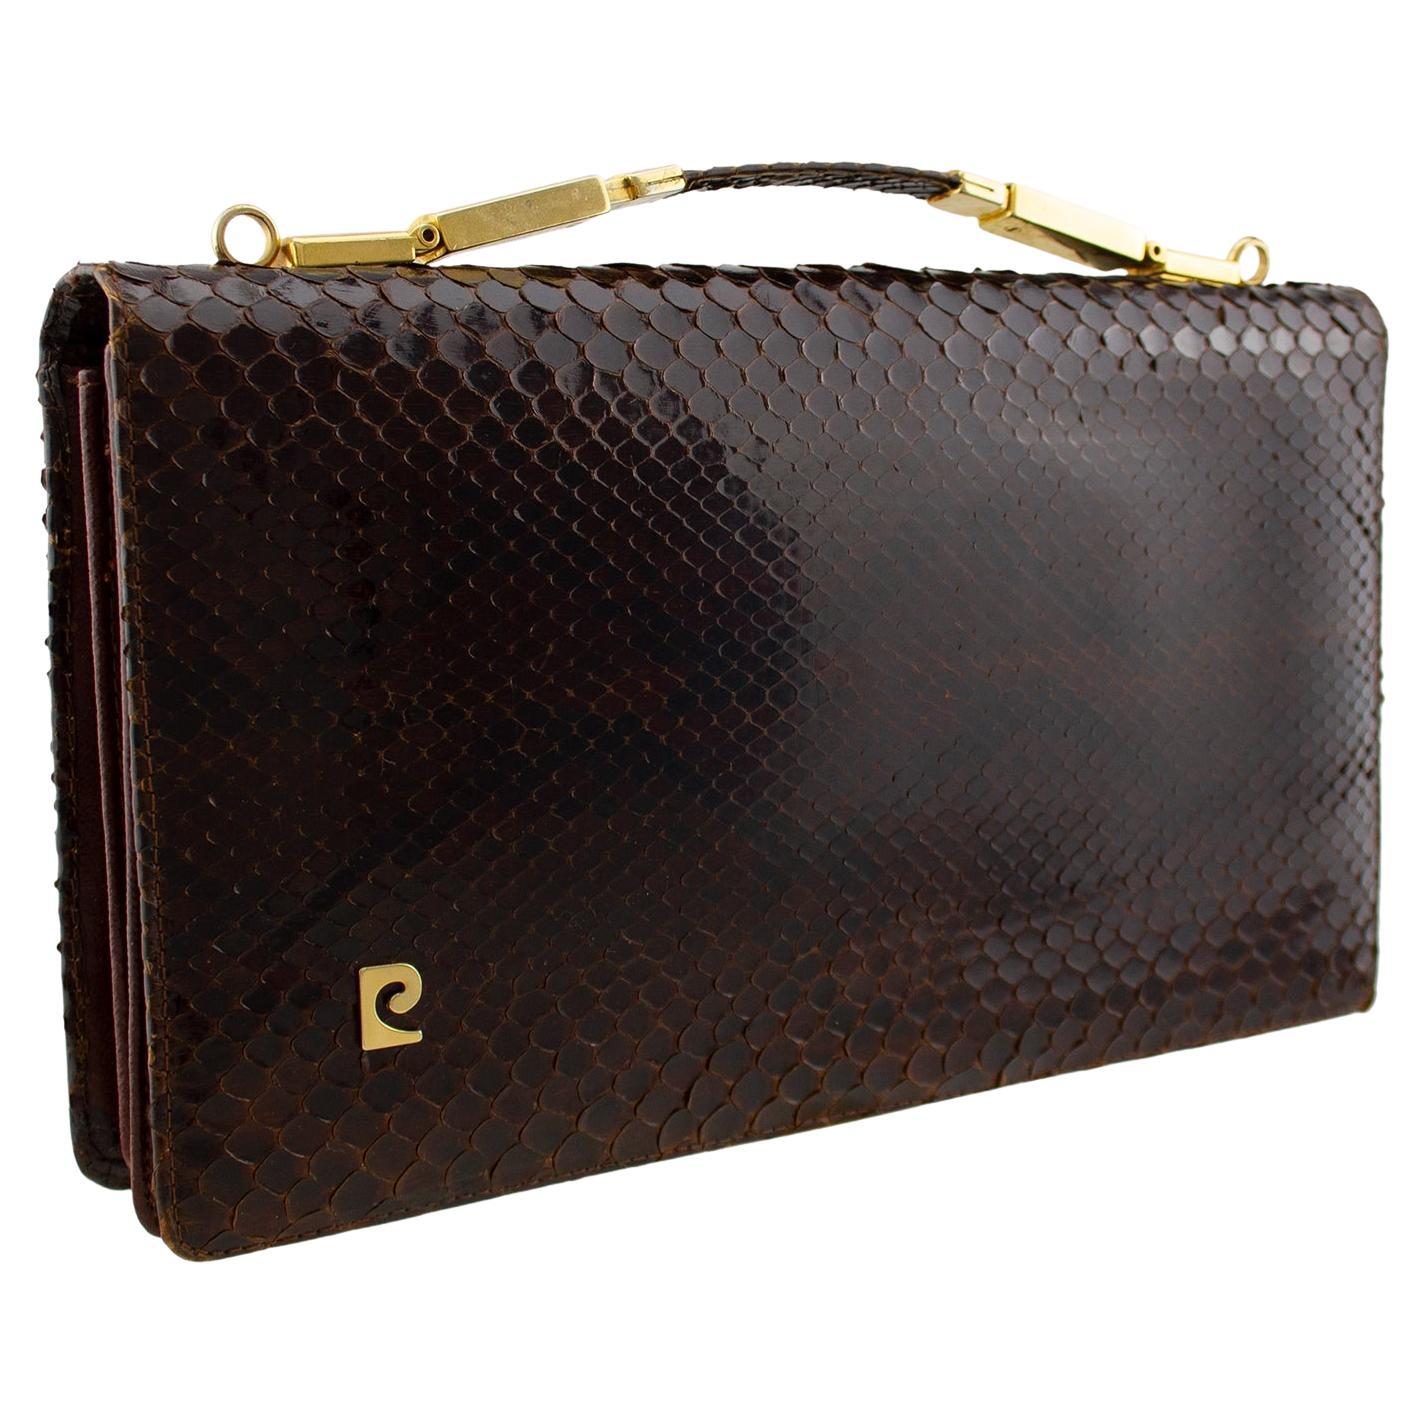 Beautiful Pierre Cardin brown skin clutch from the 1970s. Rectangular with gold tone metal hardware and retractable top handle. Small PC logo on left bottom corner. Front flap opens to a brown leather and suede interior. Accordion style with two